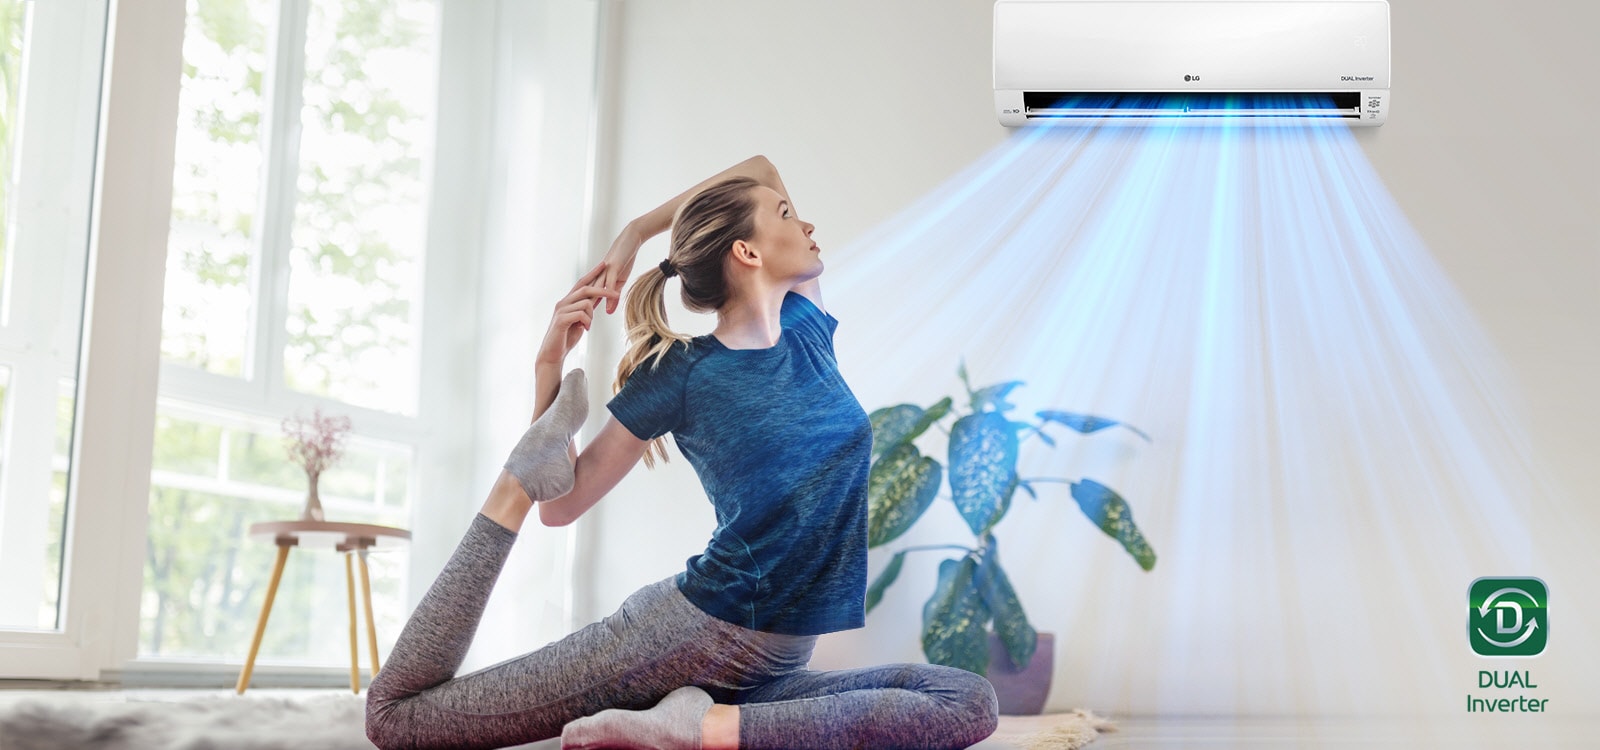 A woman stretching on the floor. In the background is the air conditioner blowing out "blue" air, blowing it over the woman and into the space. The Dual Inverter logo is in the lower right corner.